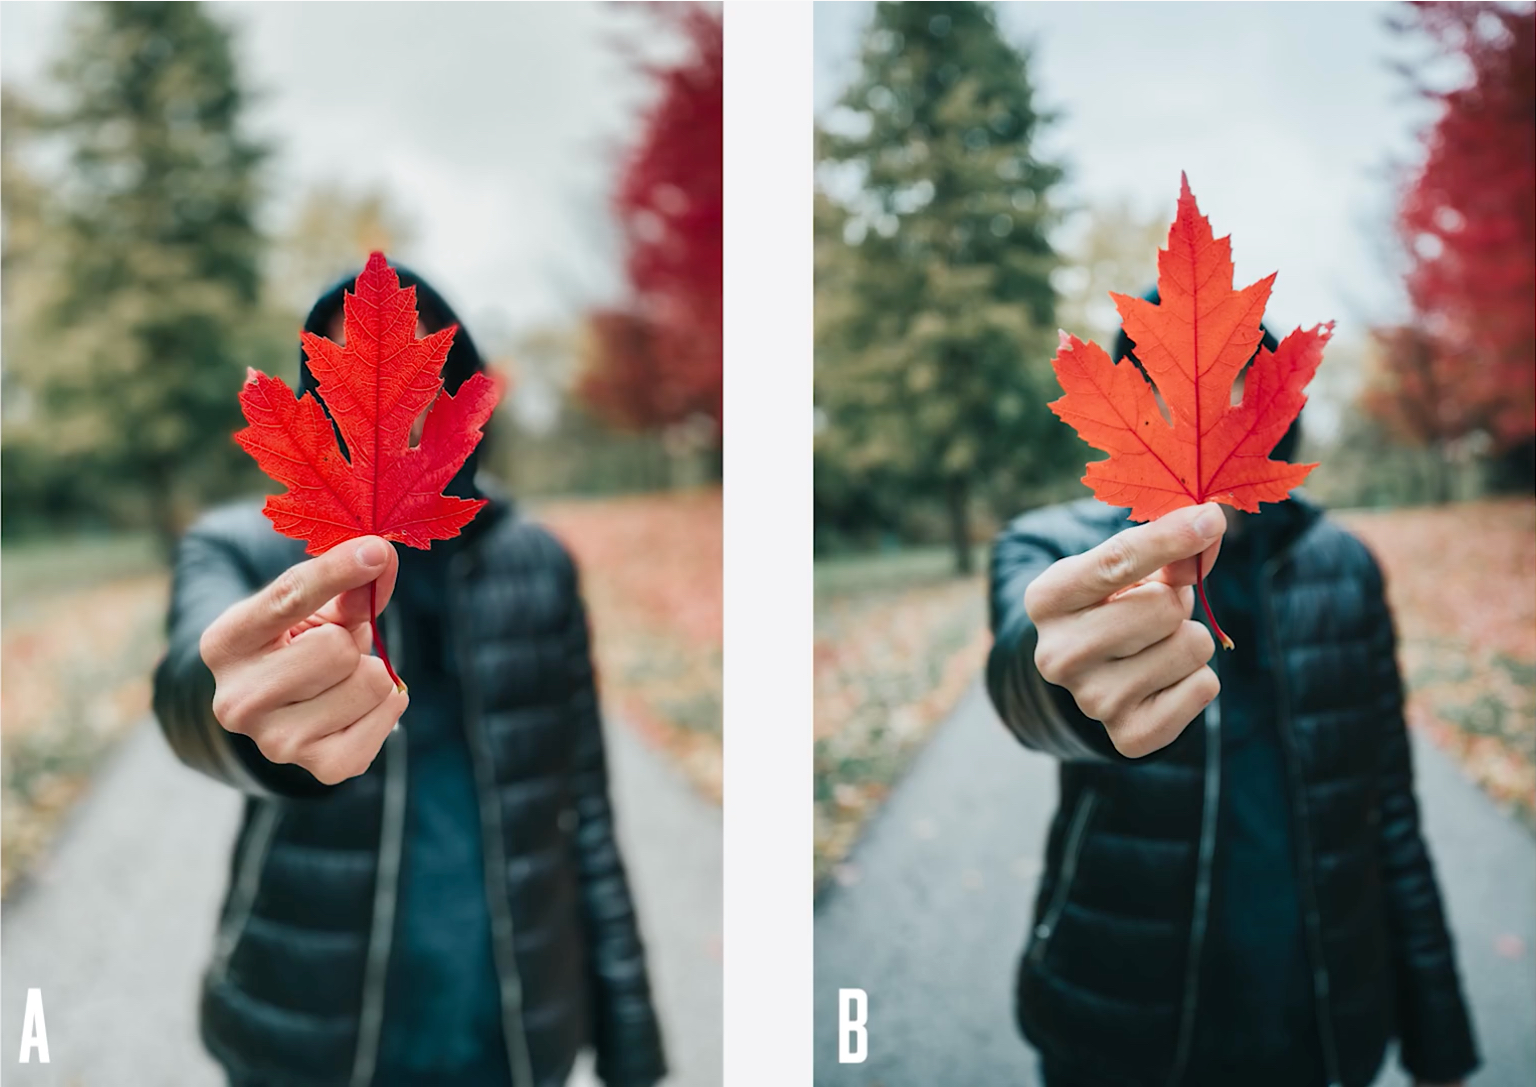 Check out this iPhone 11 Pro vs Canon DSLR photoshoot | iMore